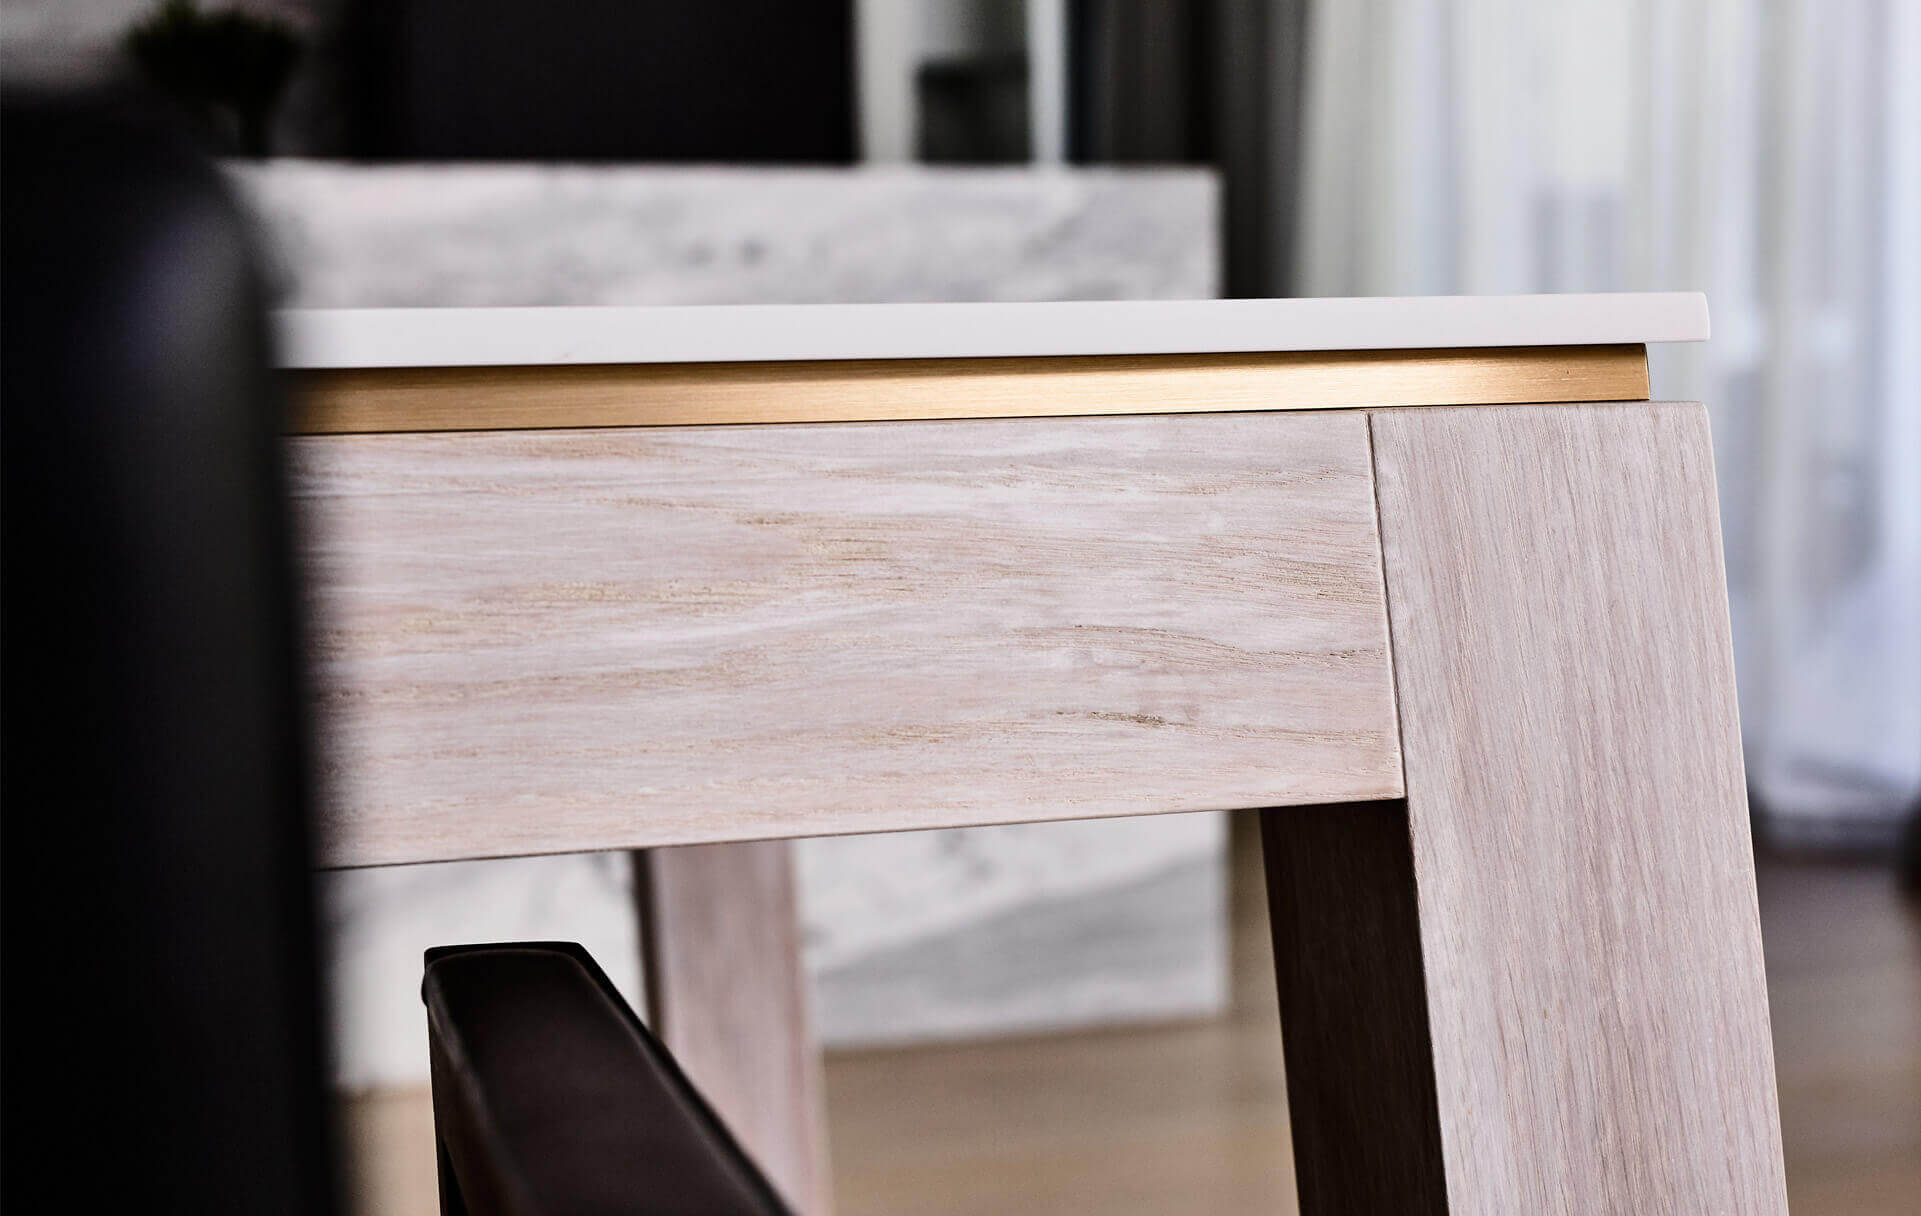 Sophisticated material palette is on show in this close up glimpse of Australian designer FrancoCrea's designer dining table